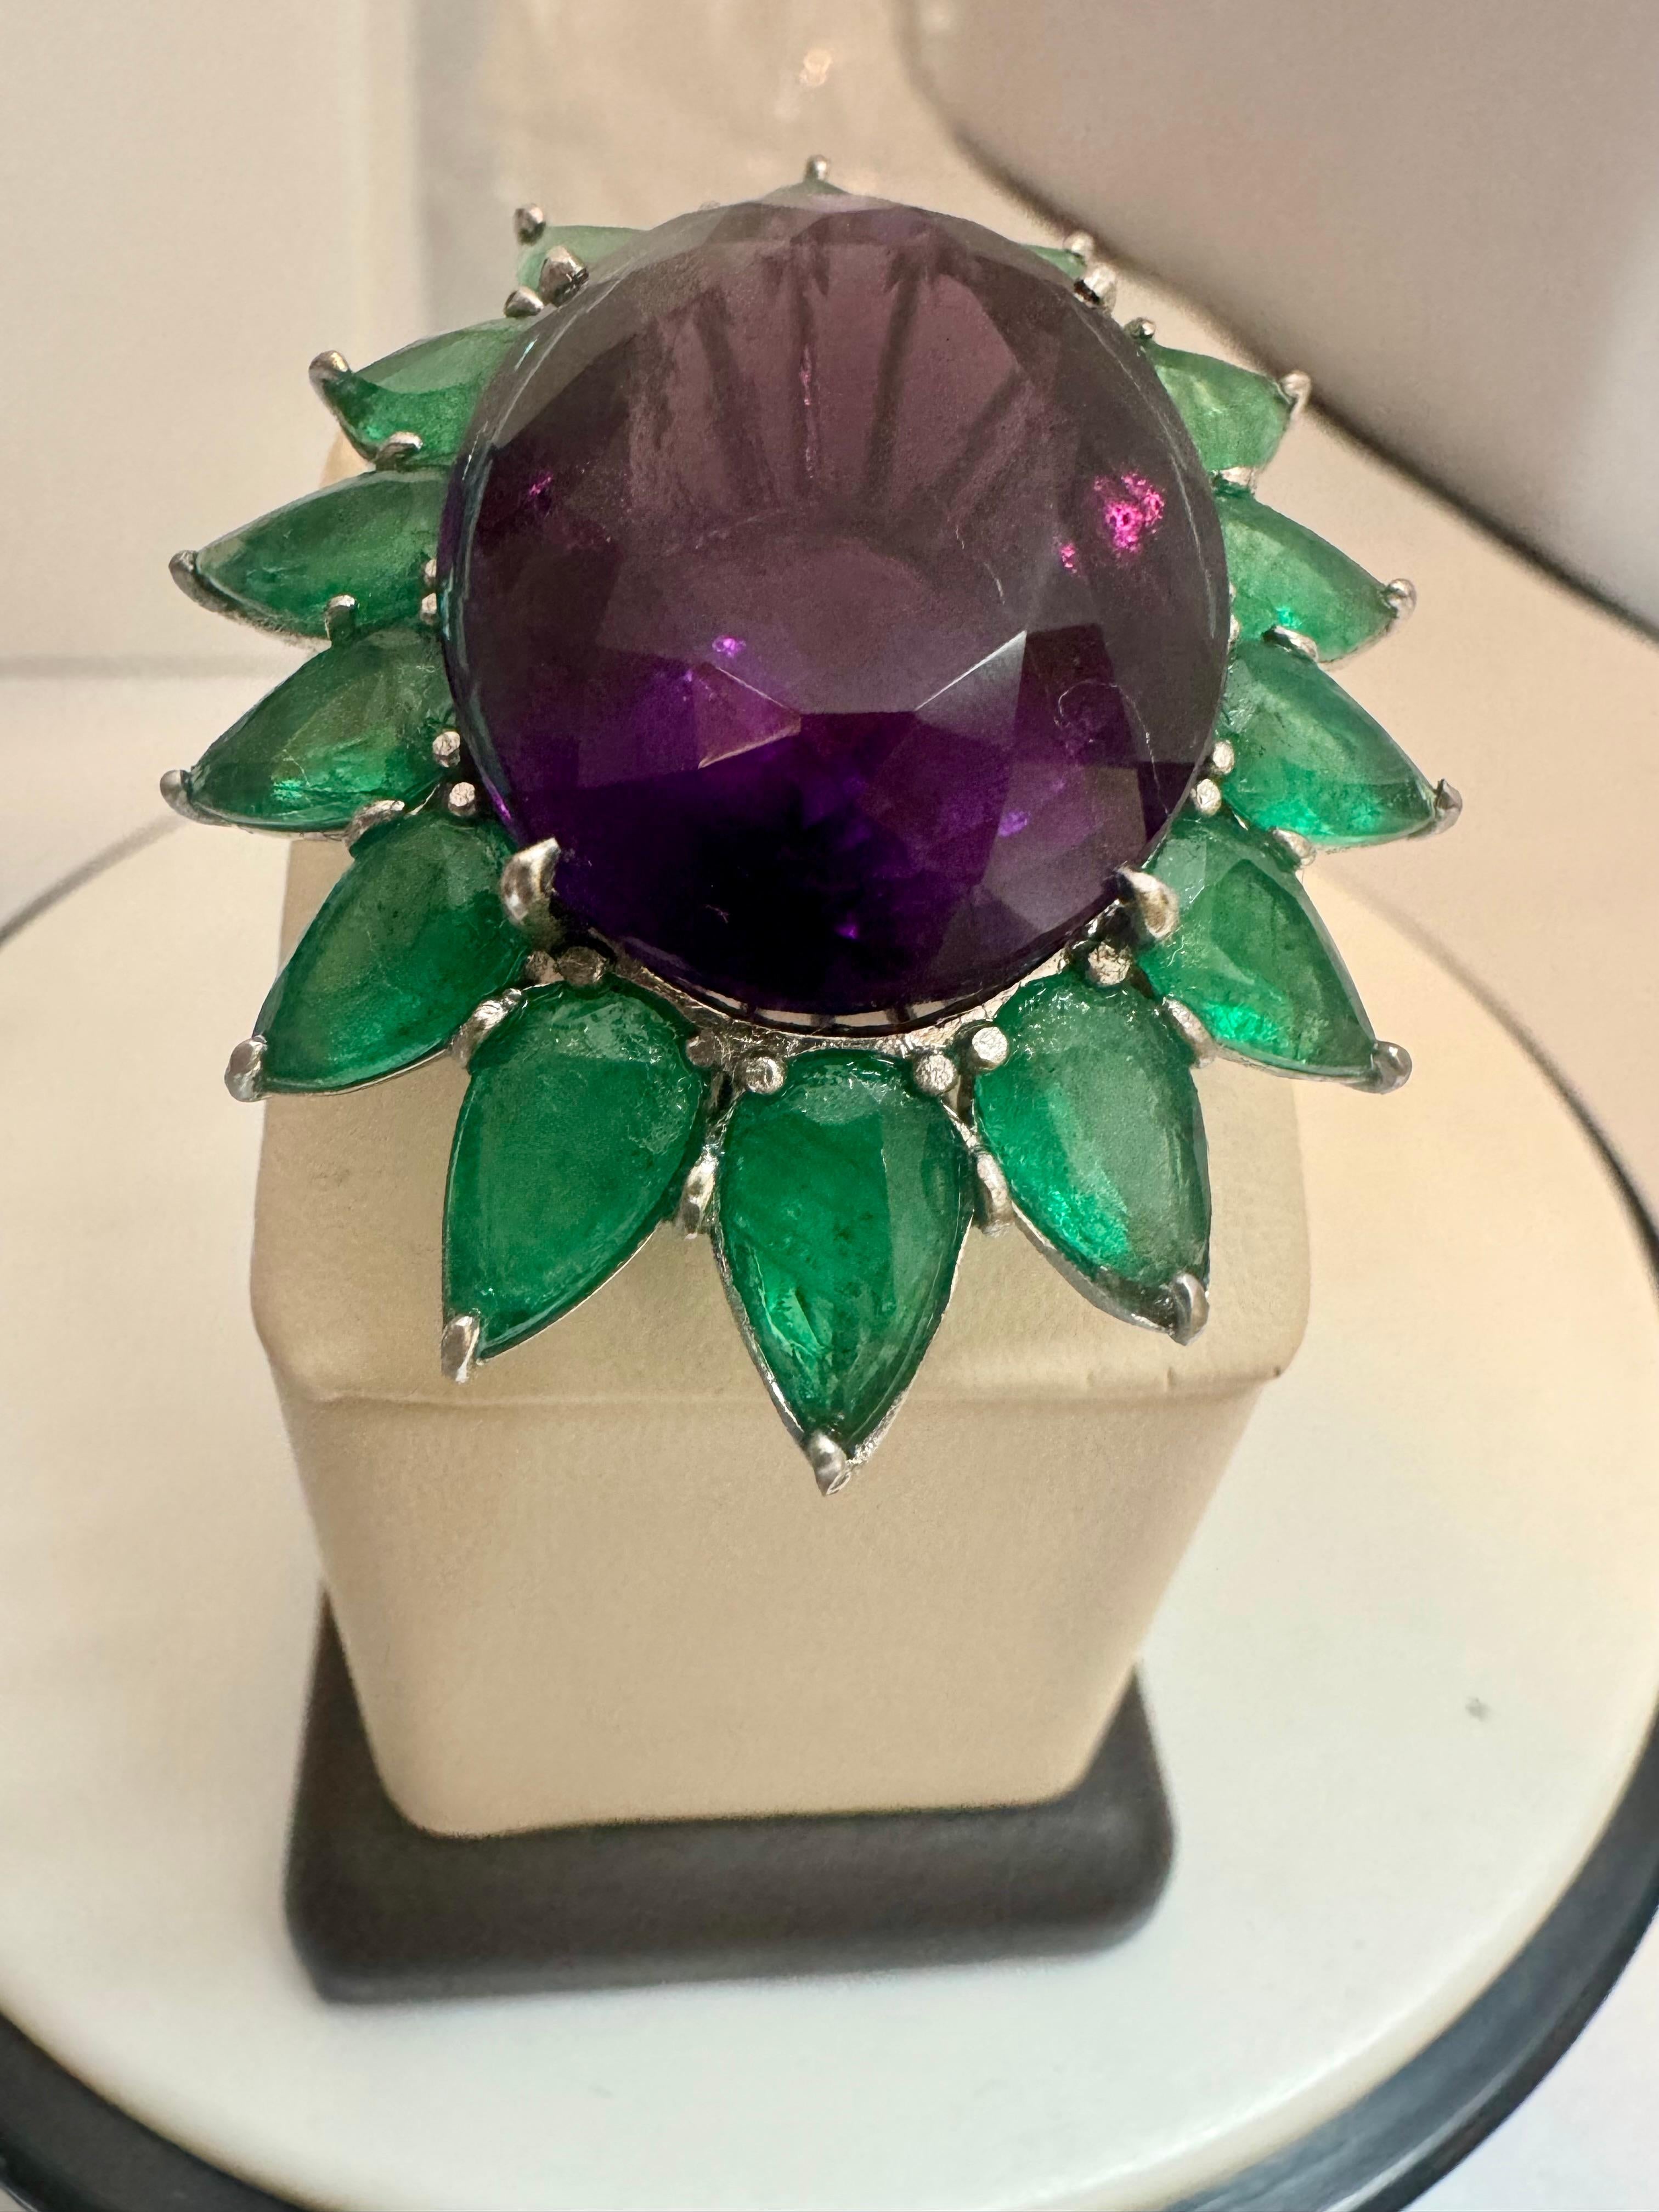 30 Ct Oval Amethyst & 25 Ct Emerald Large Cocktail Ring in Platinum, 32gm, Size6 For Sale 9